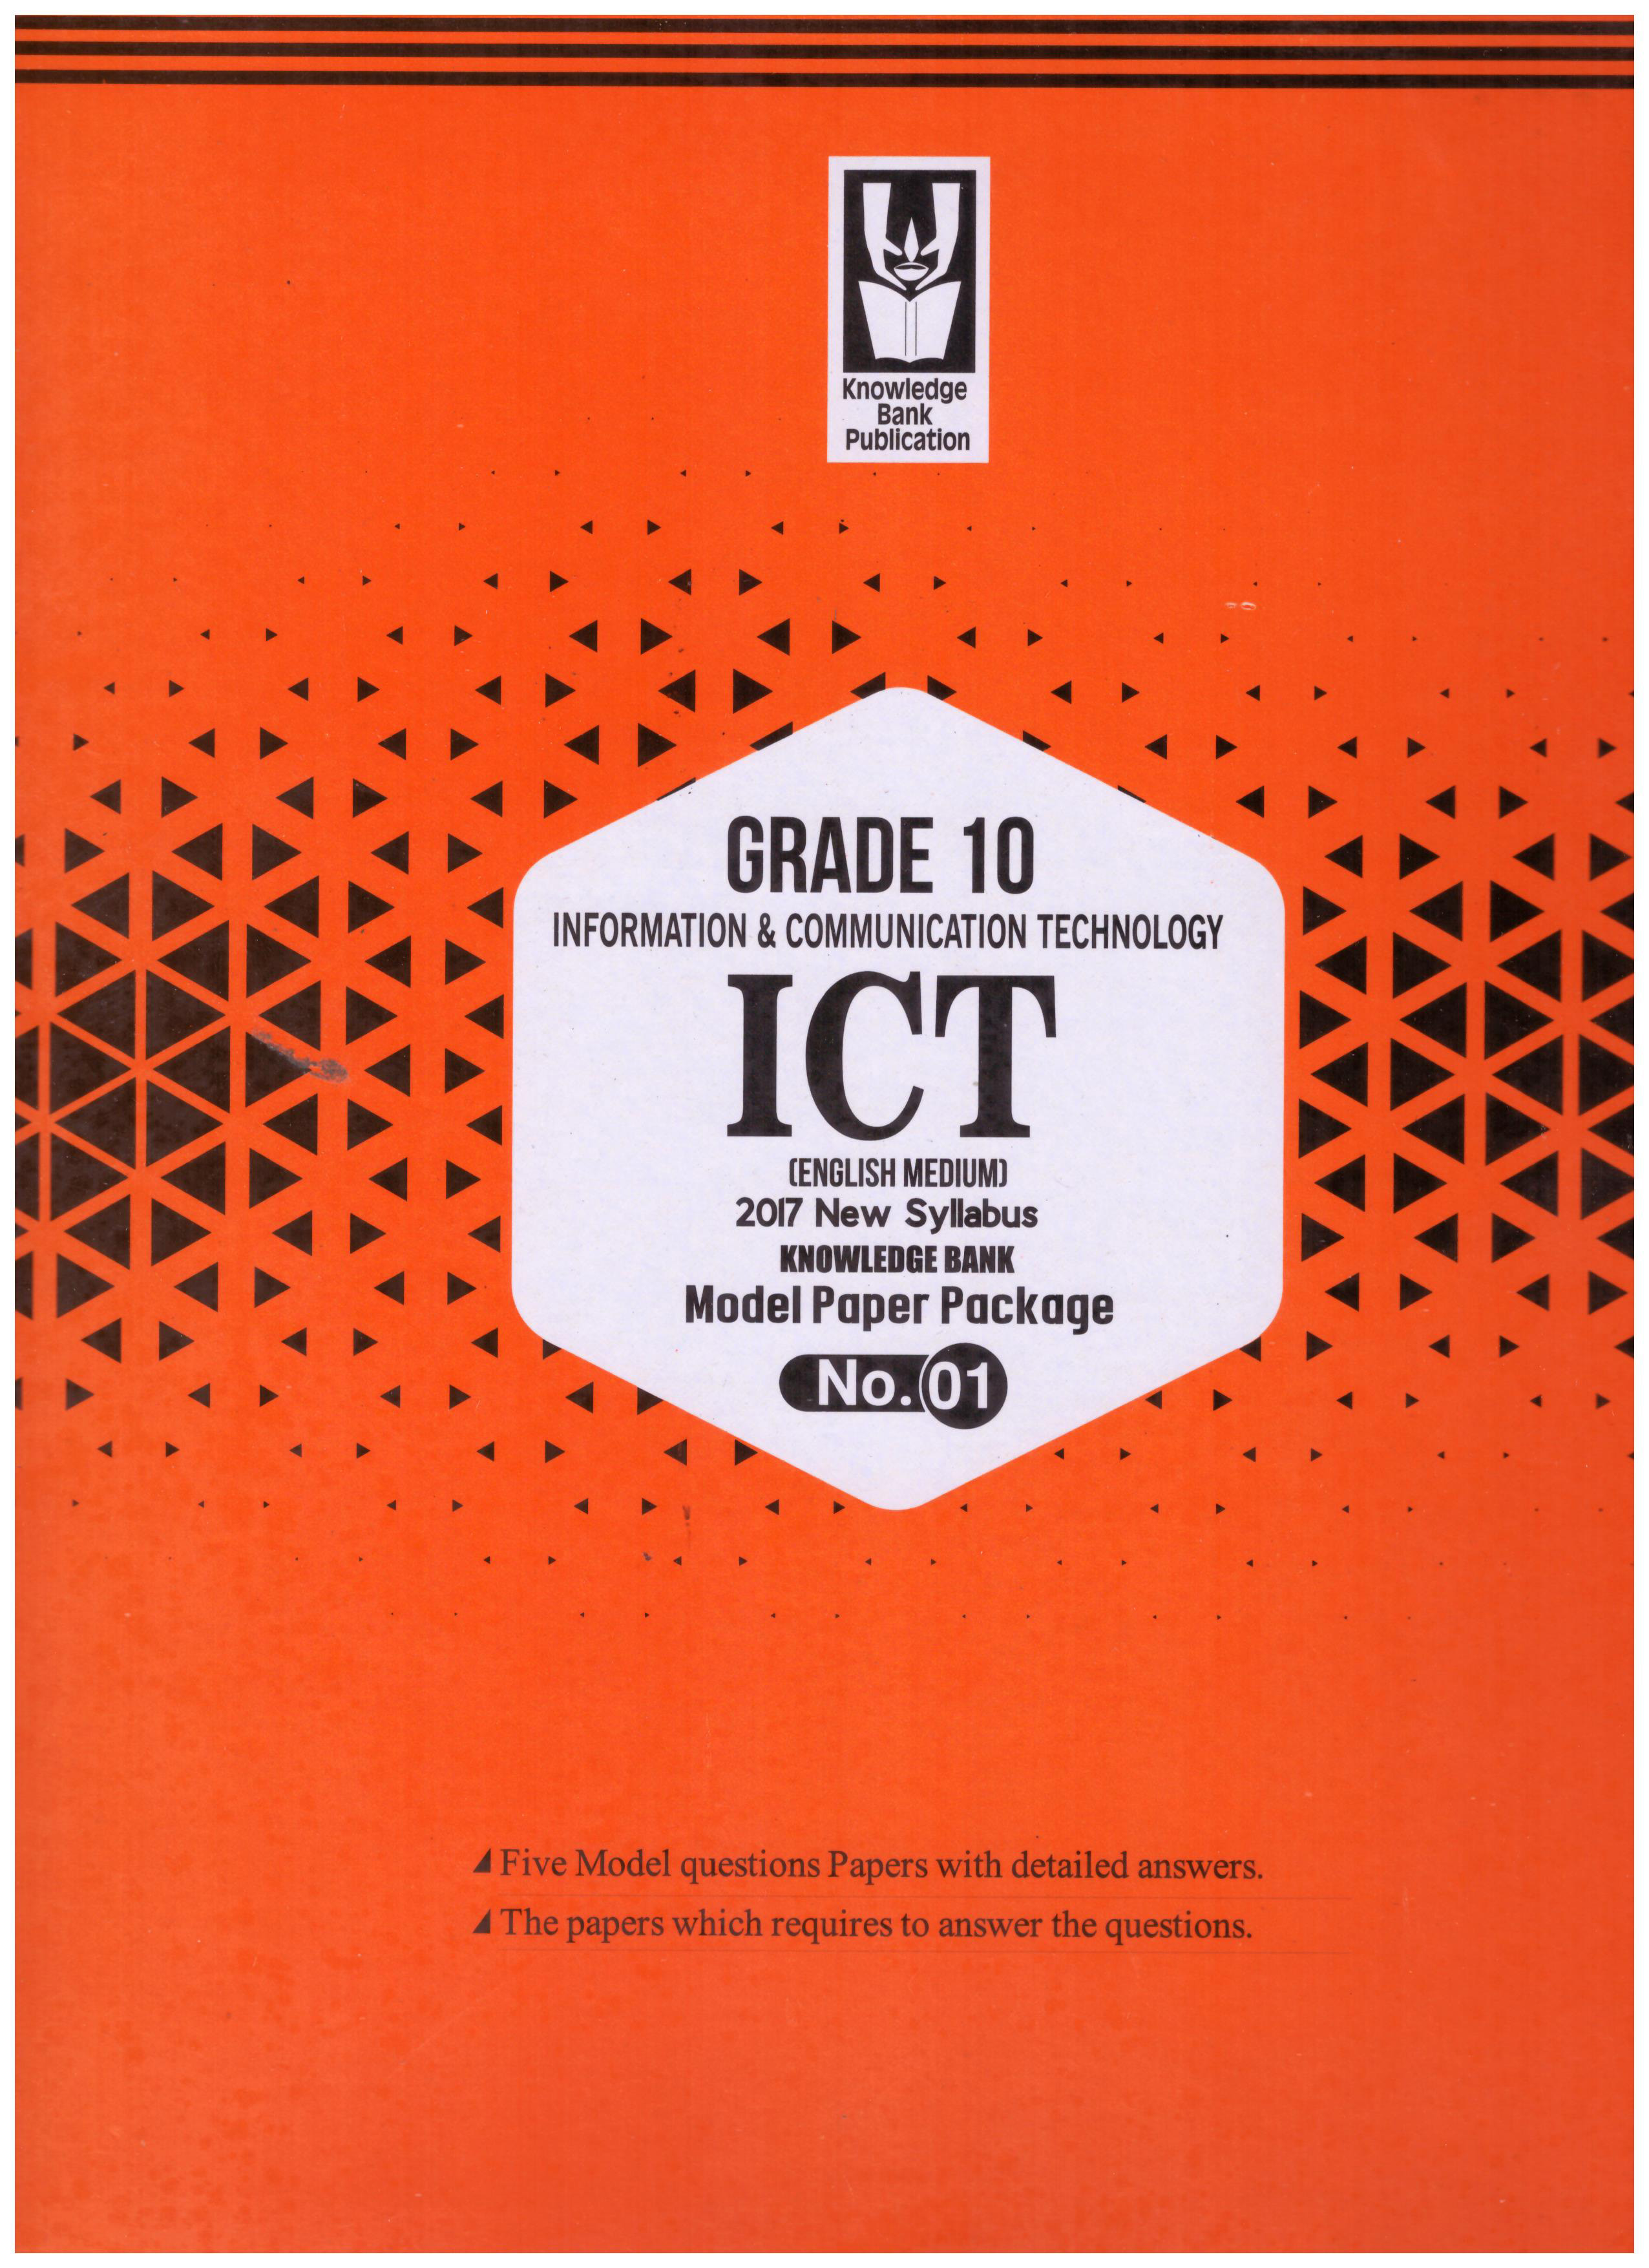 Knowledge Bank ICT Grade 10 No 01 Model Paper Package ( New Syllabus)